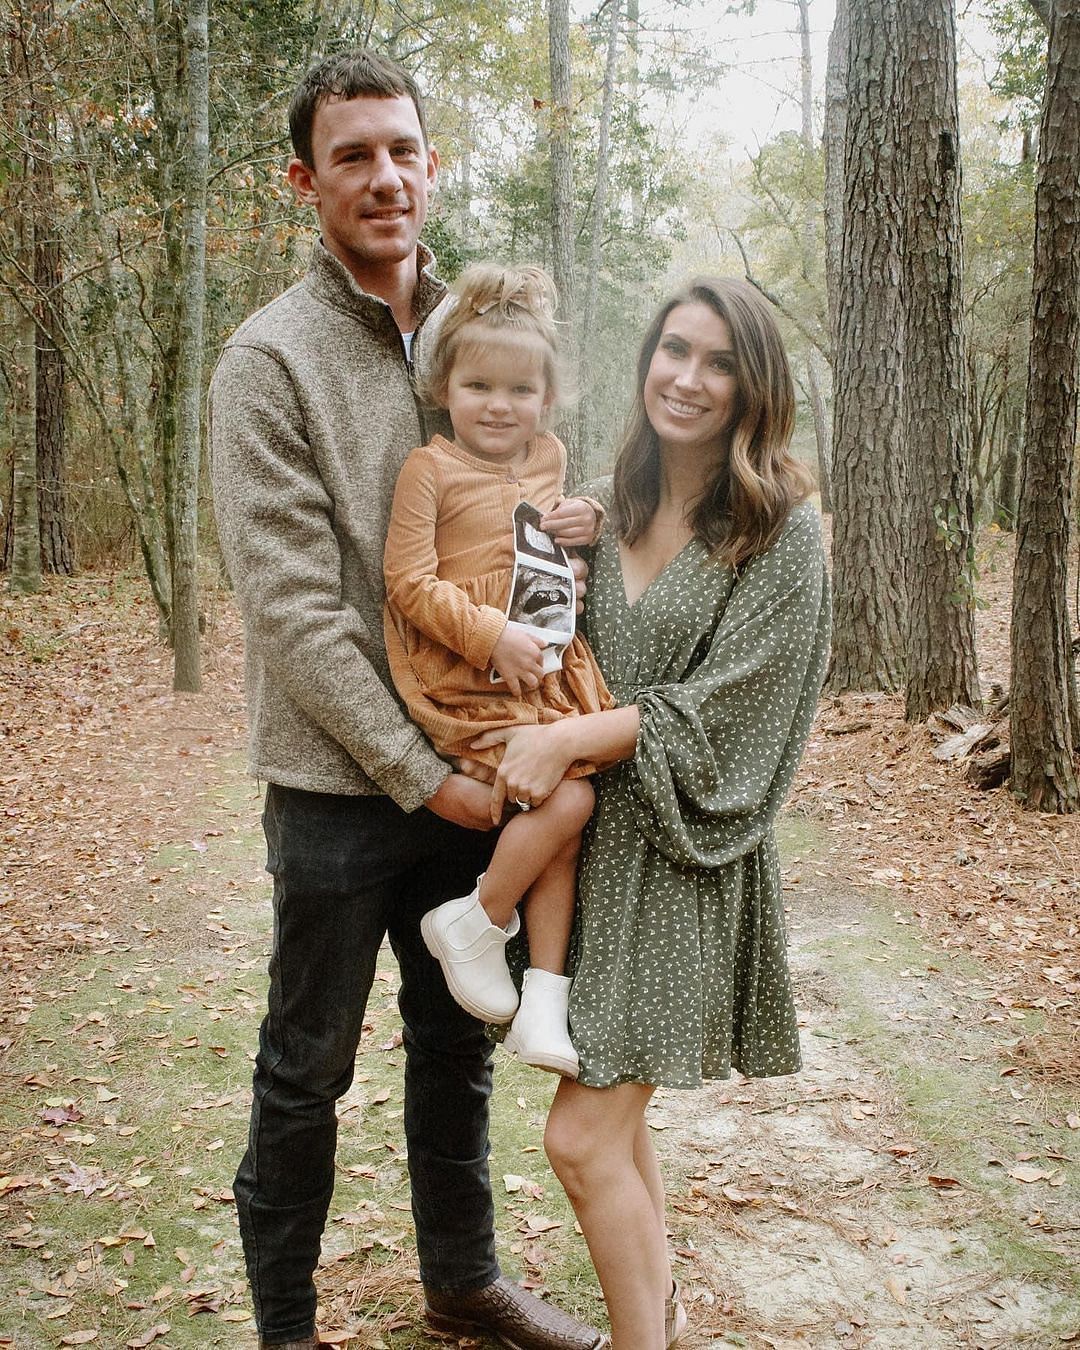 Chris Bassitt with his wife Jessica and daughter. Source: Chris Bassitt&rsquo;s official Instagram handle @cbass419